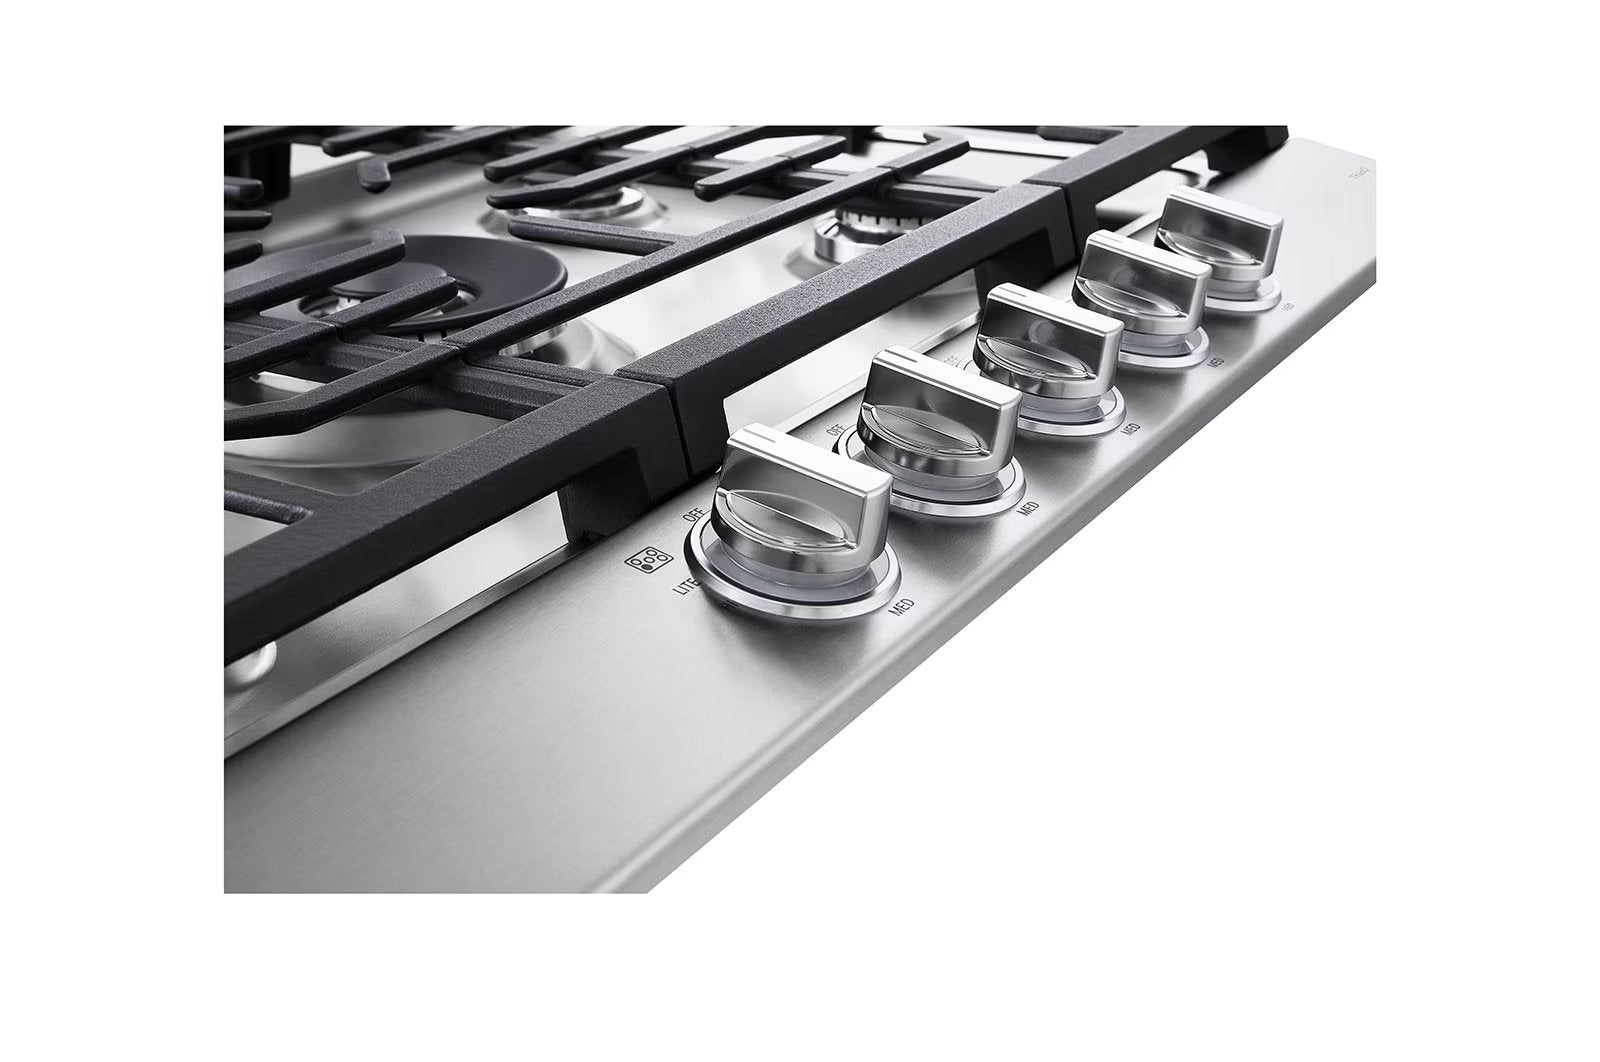 LG - 30 inch wide Gas Cooktop in Stainless - CBGJ3027S